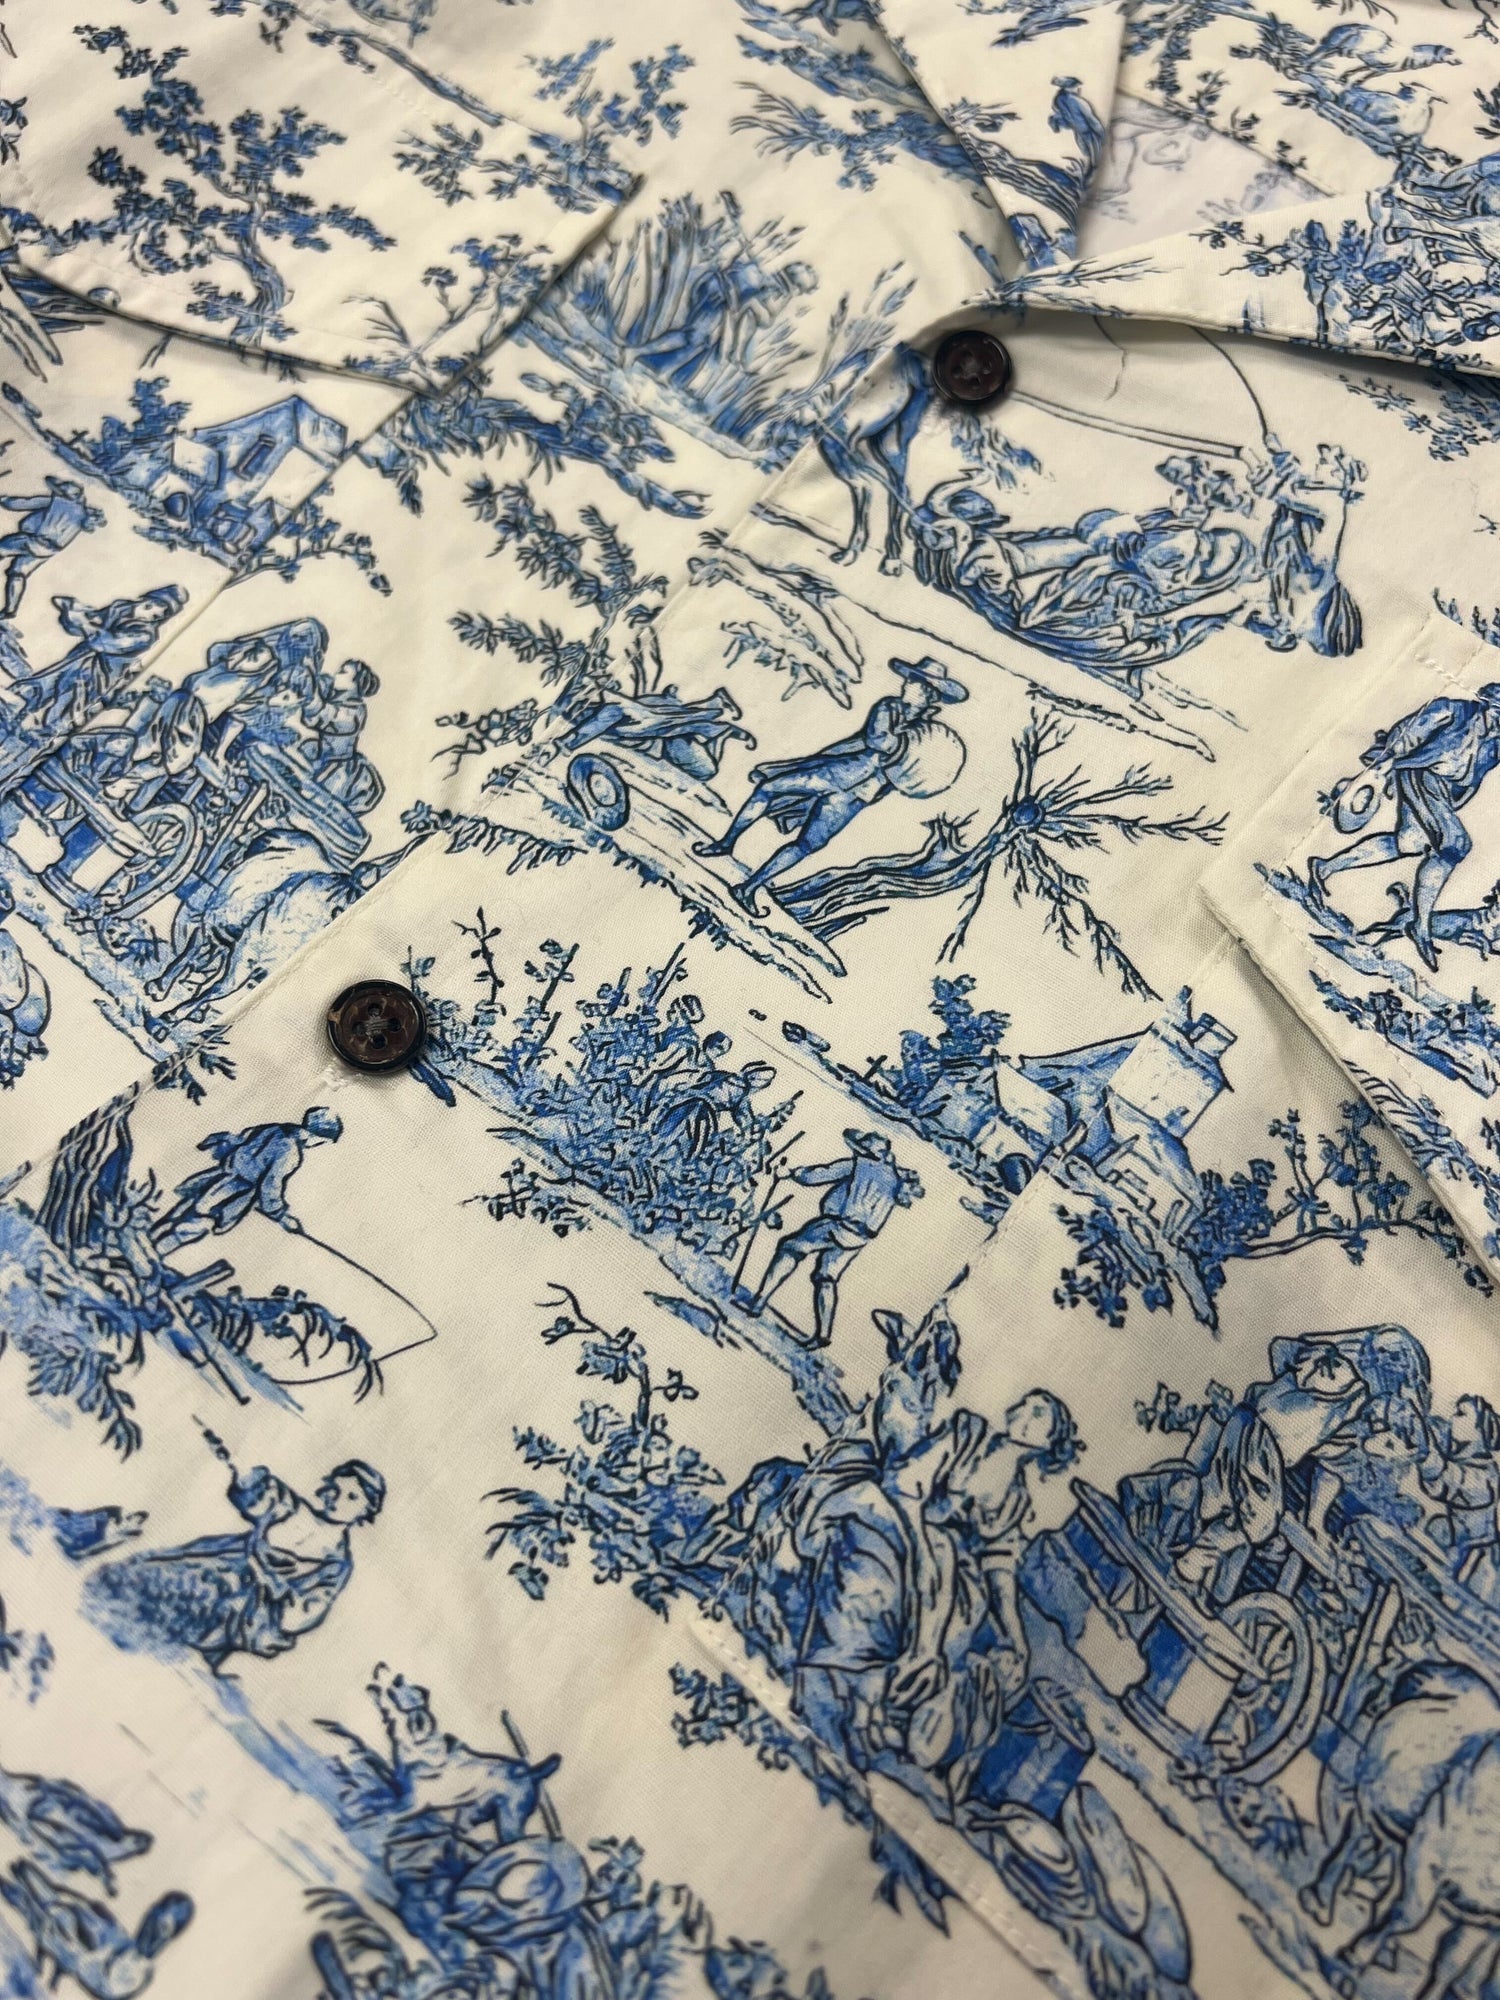 A 100% cotton shirt with a blue and white toile print, the Profound Sample 65 (Porcelain Camp Shirt).